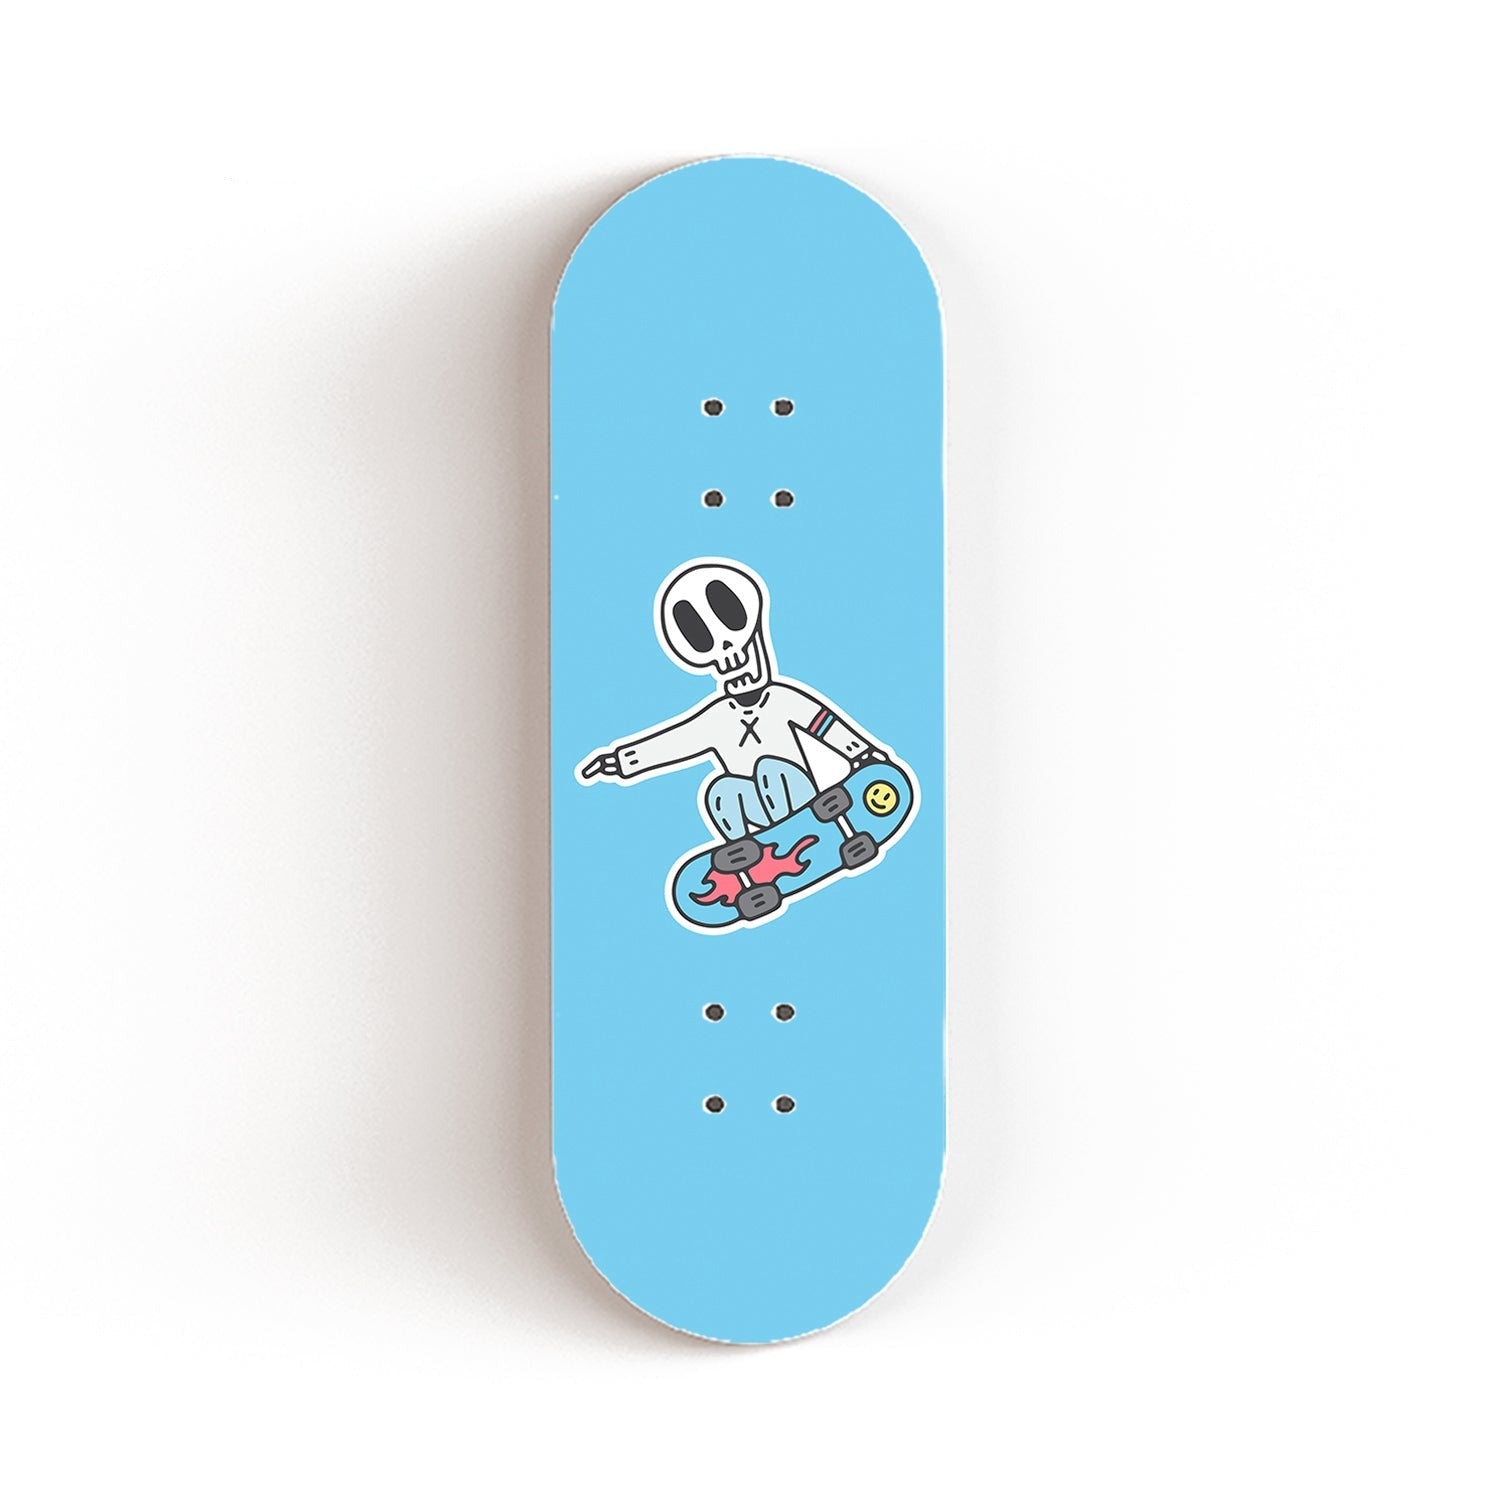 Buy Pro Fingerboard Deck With Real Wear Graphic | XFlippro